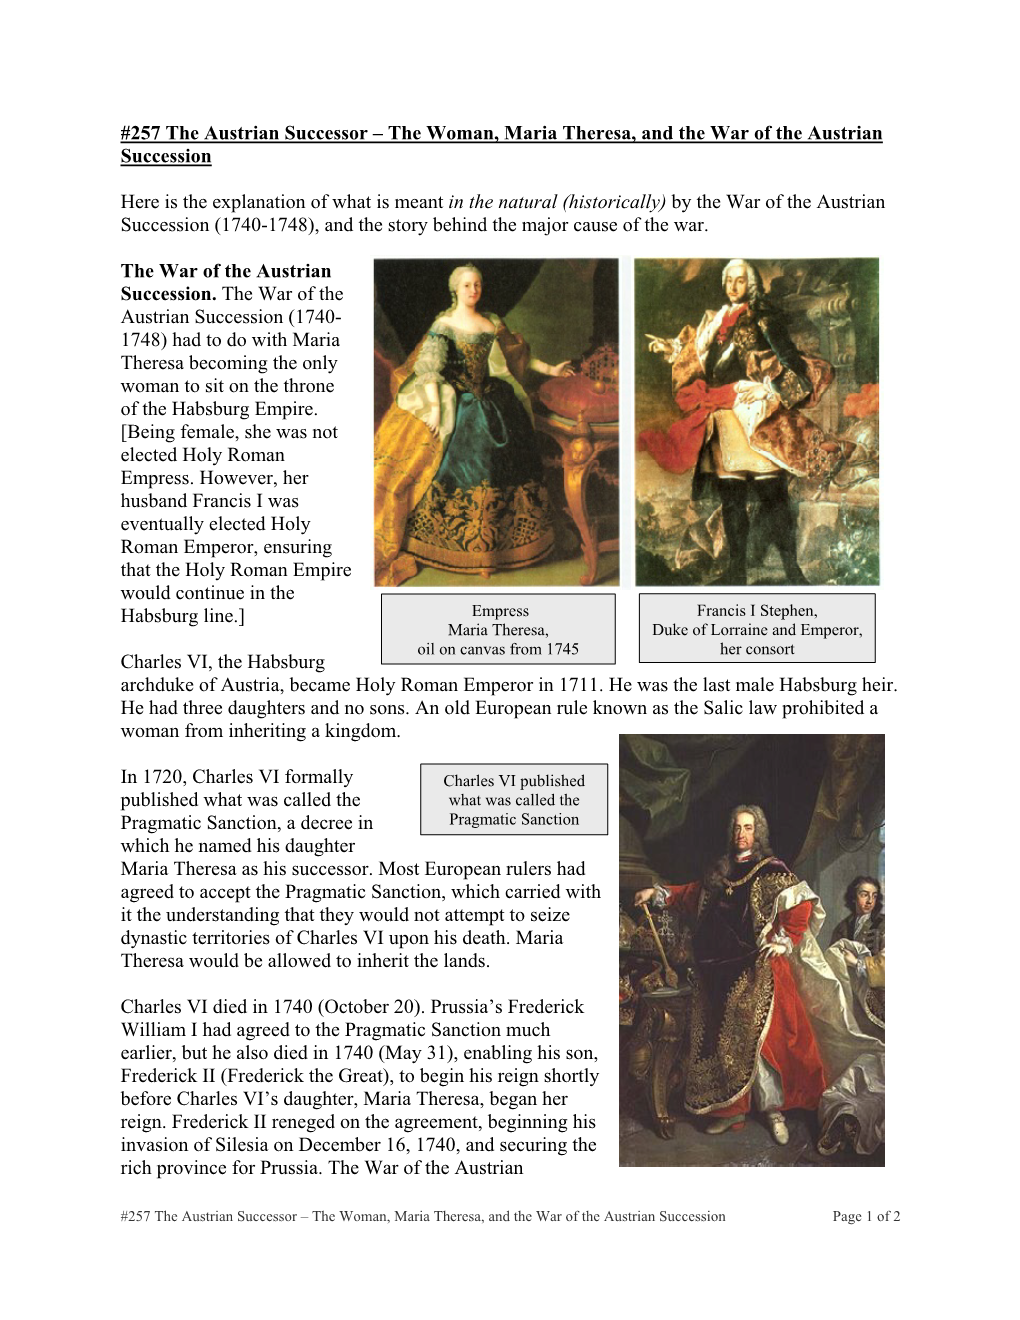 257 the Austrian Successor – the Woman, Maria Theresa, and the War of the Austrian Succession